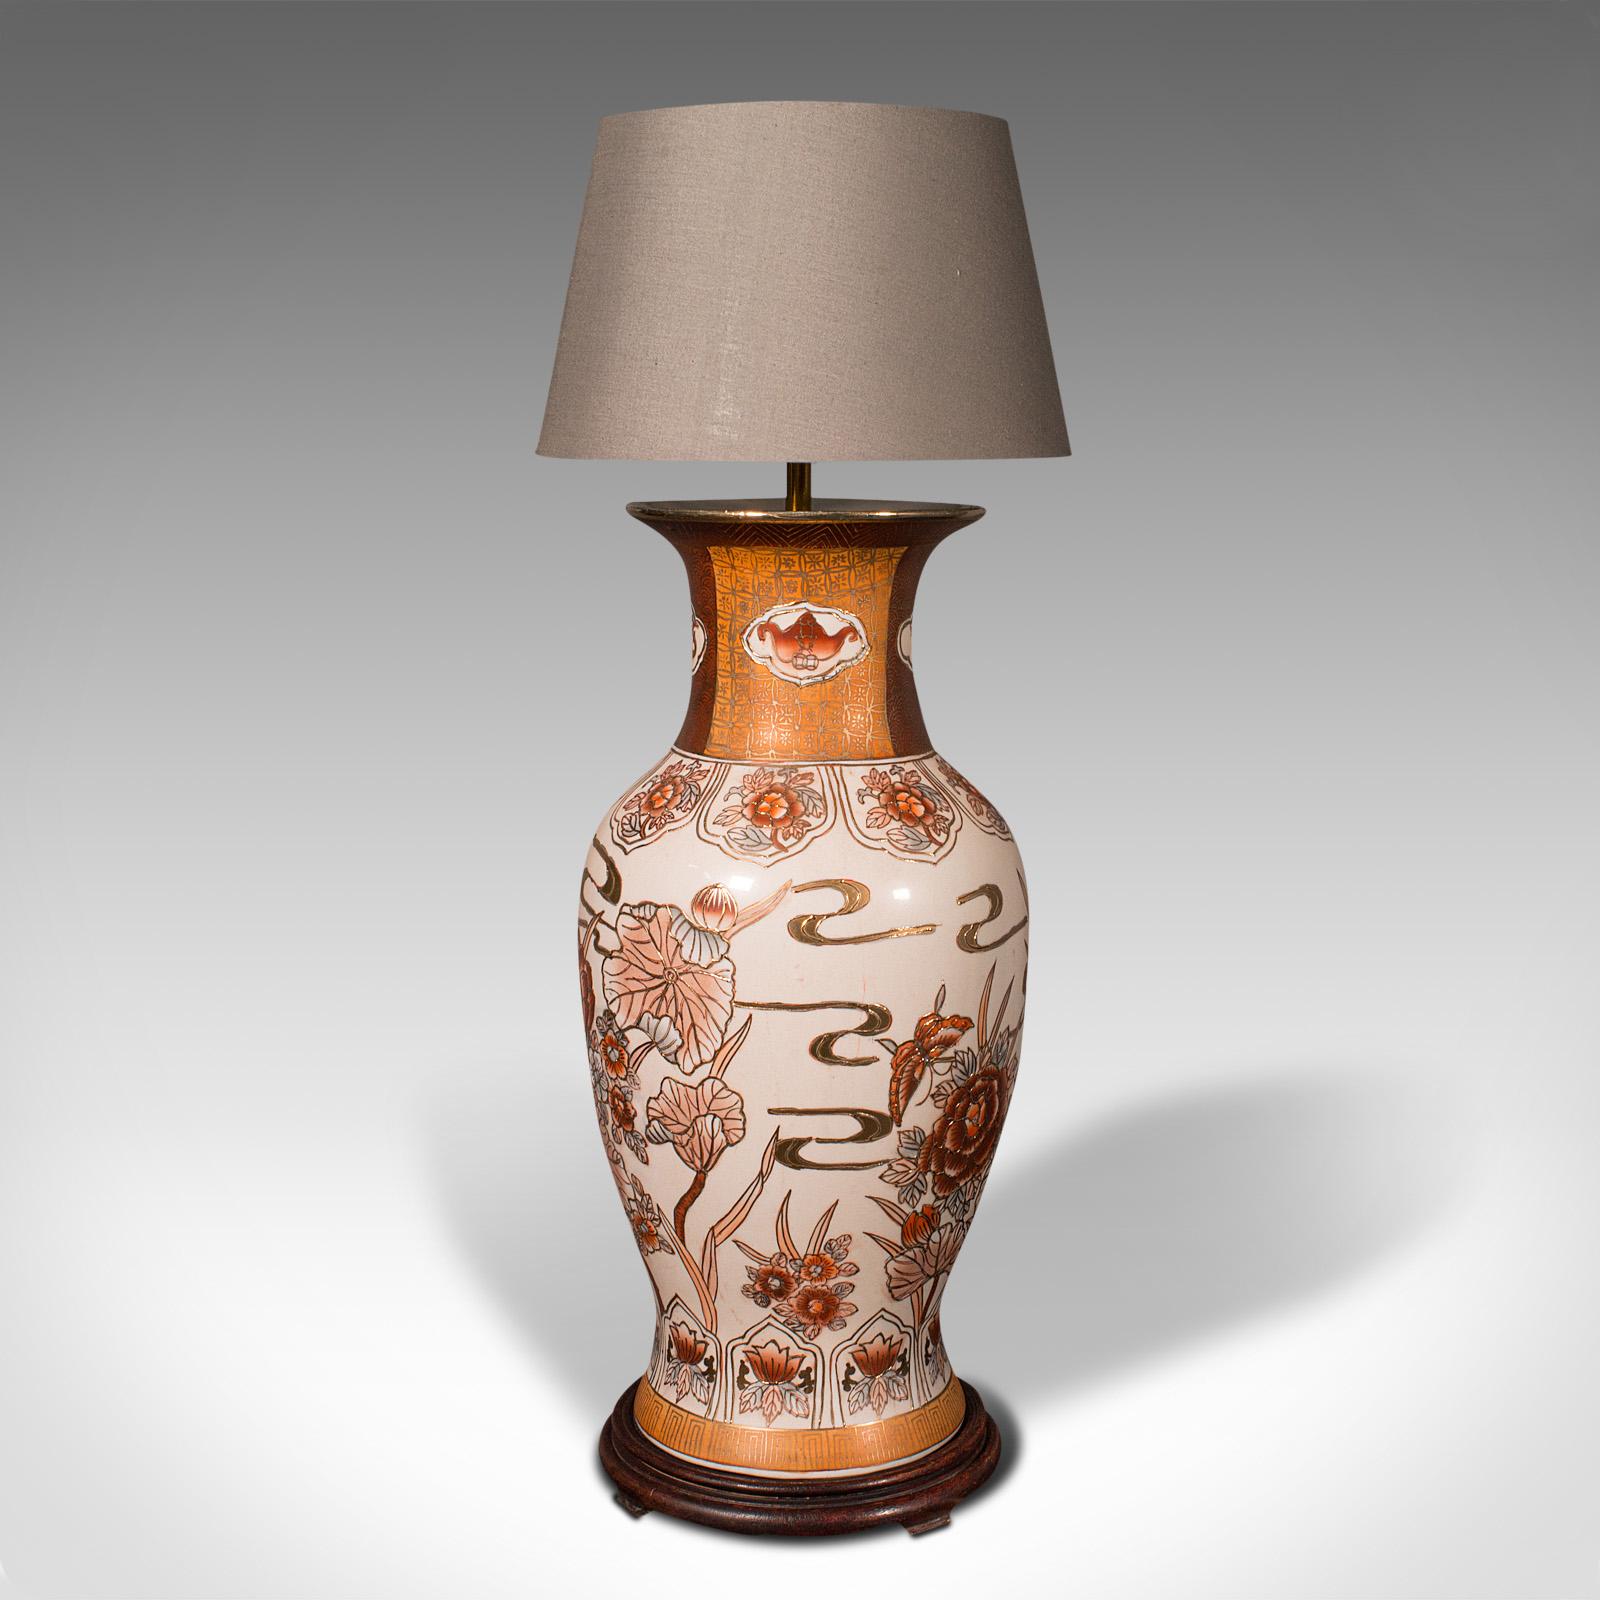 Pair of Vintage Table Lamps, Chinese, Ceramic, Decorative Light, Art Deco, 1940 For Sale 2